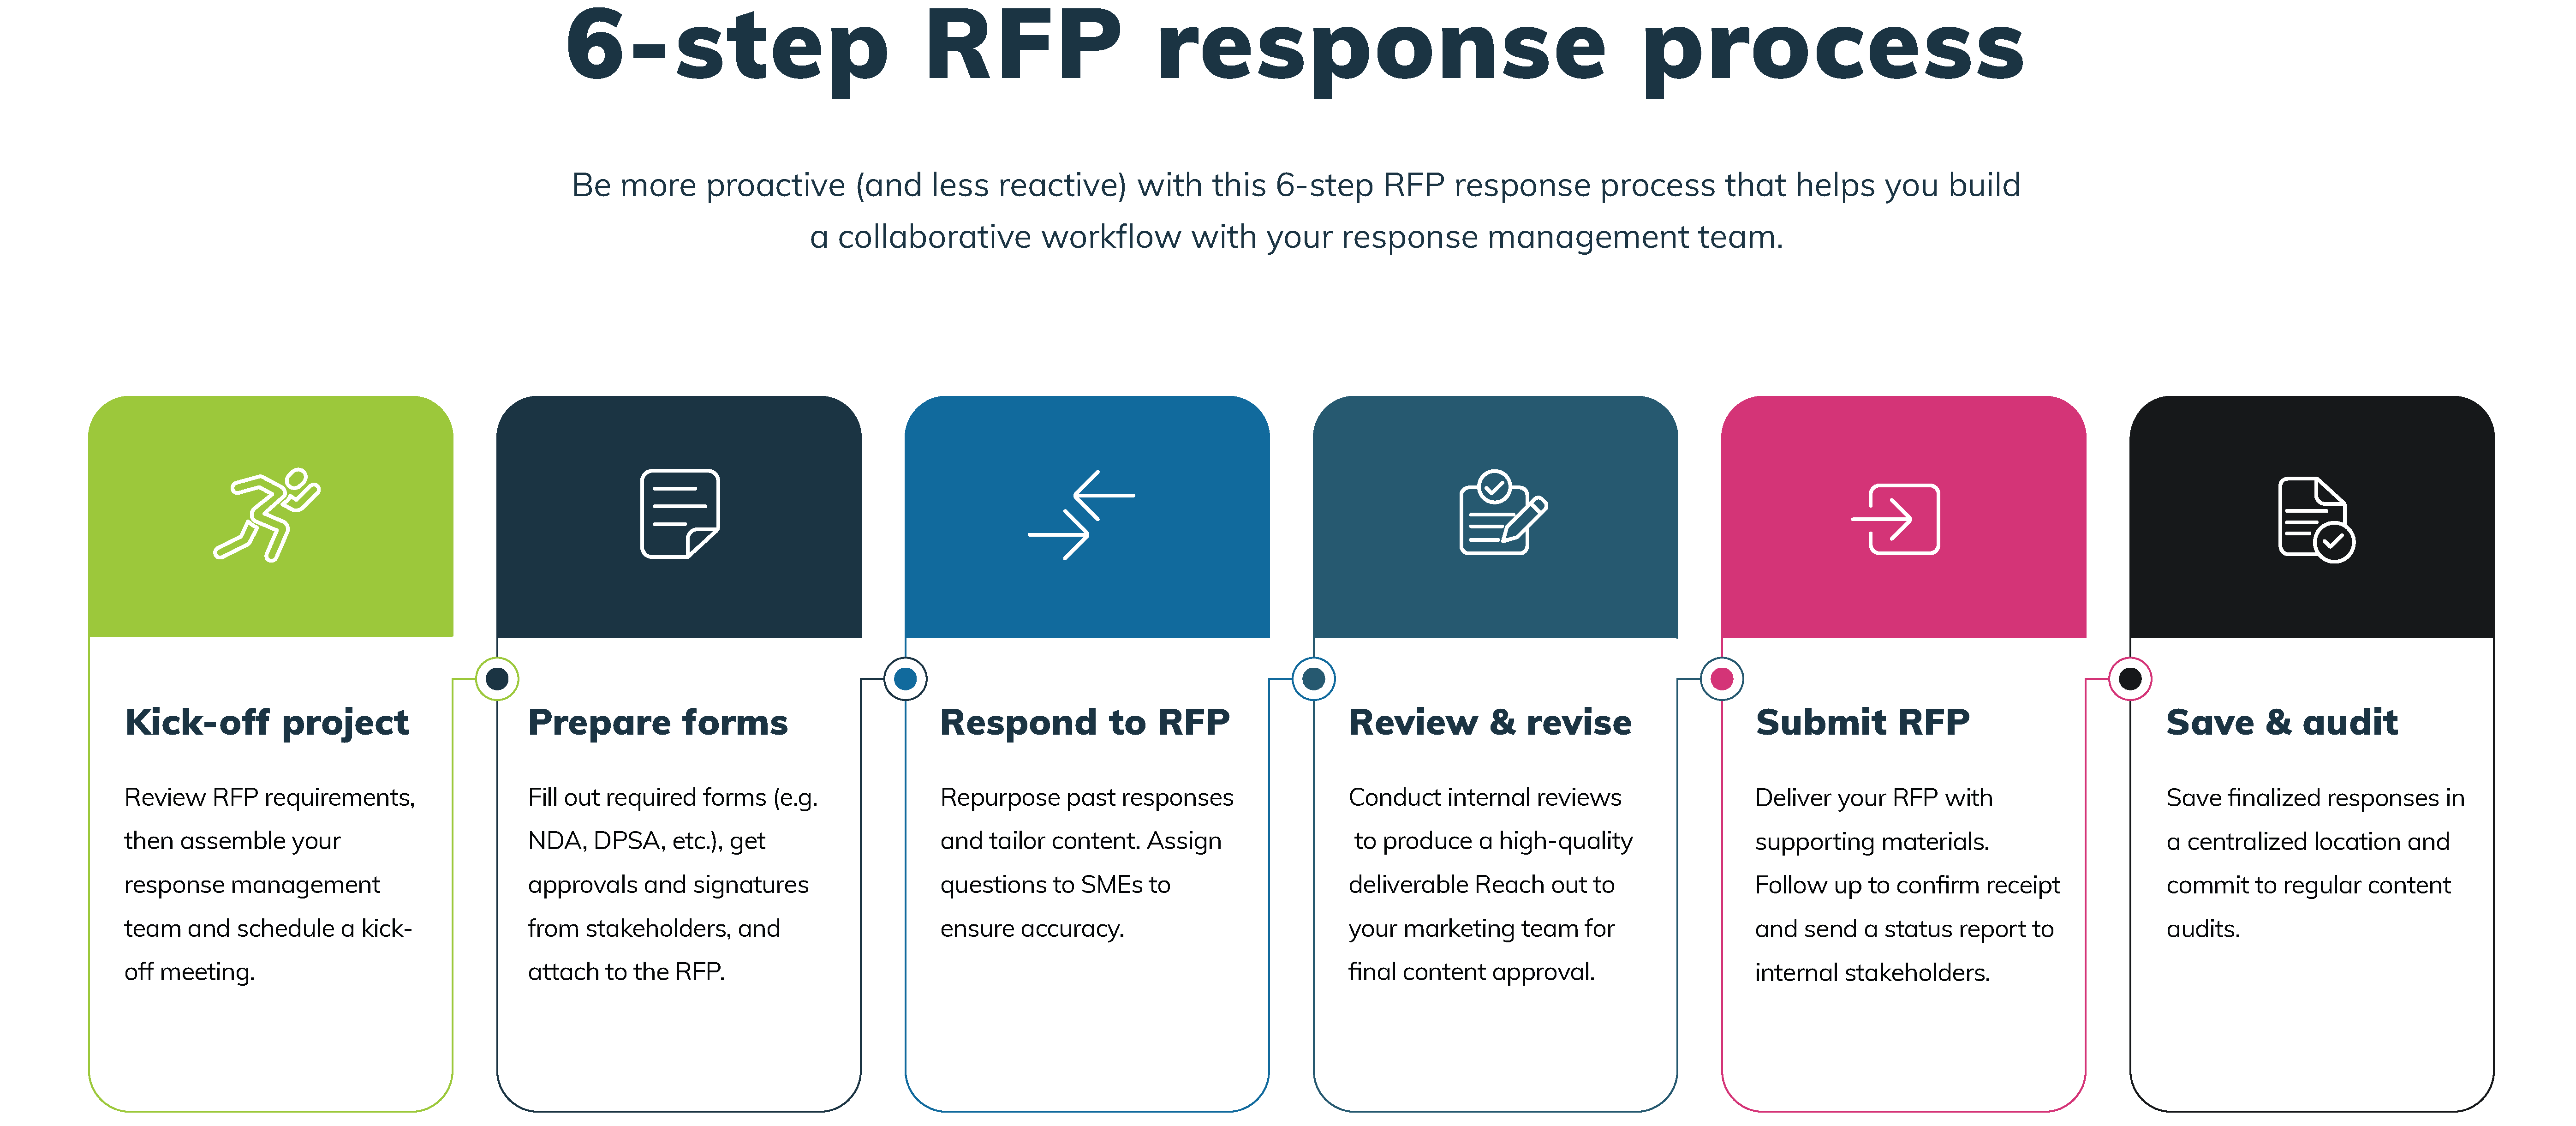 RFP 101: Request for Proposal Basics